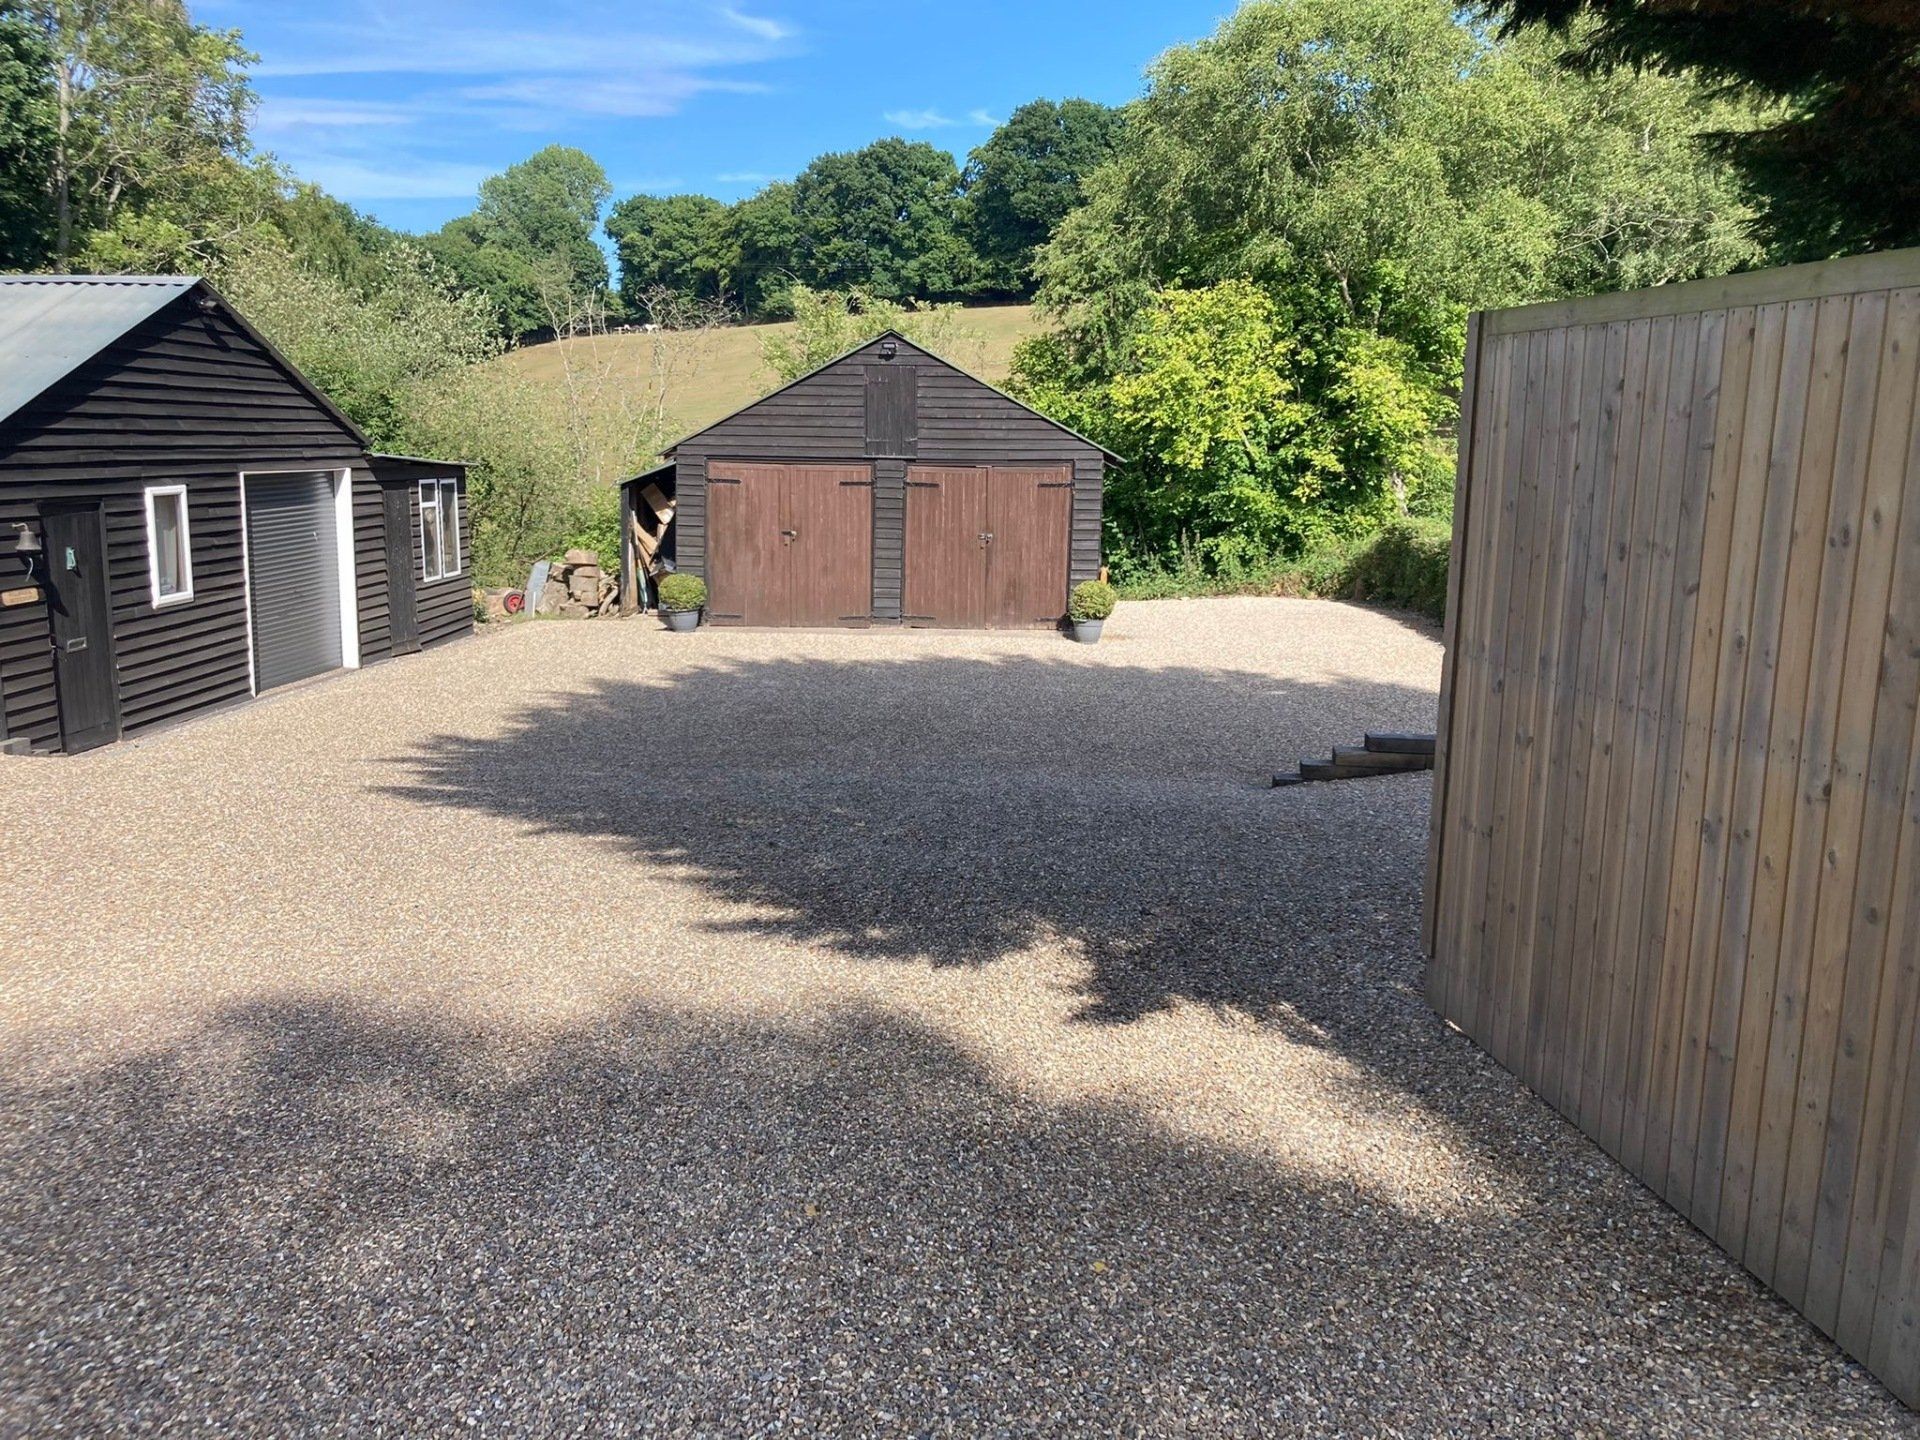 Two garages are sitting next to each other in a gravel driveway.